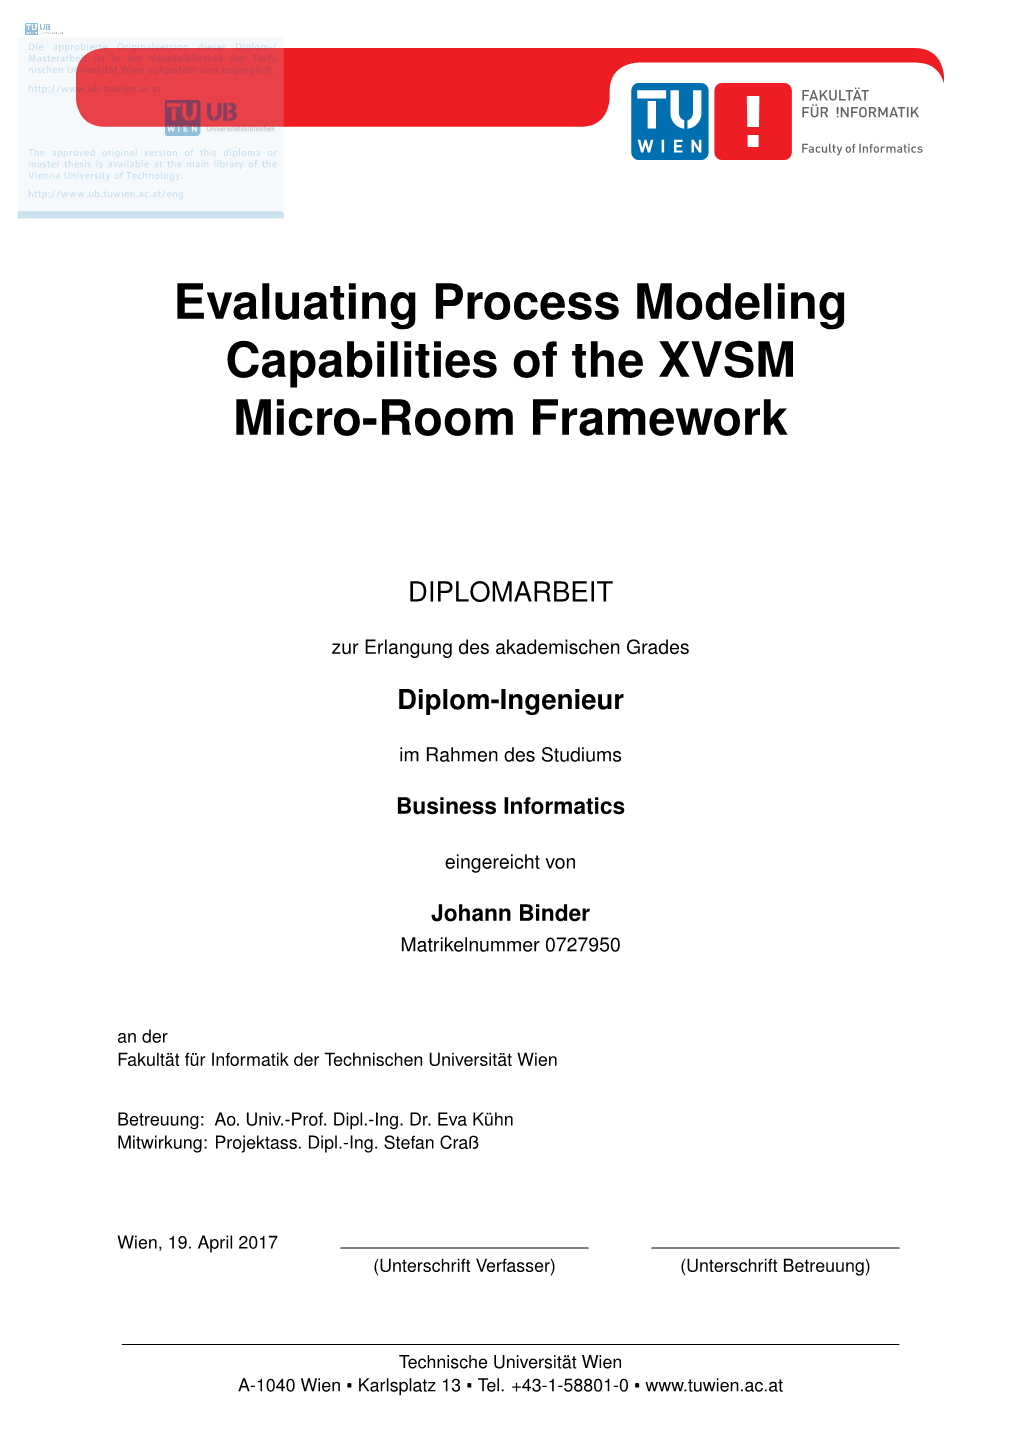 Evaluating Process Modeling Capabilities of the XVSM Micro-Room Framework